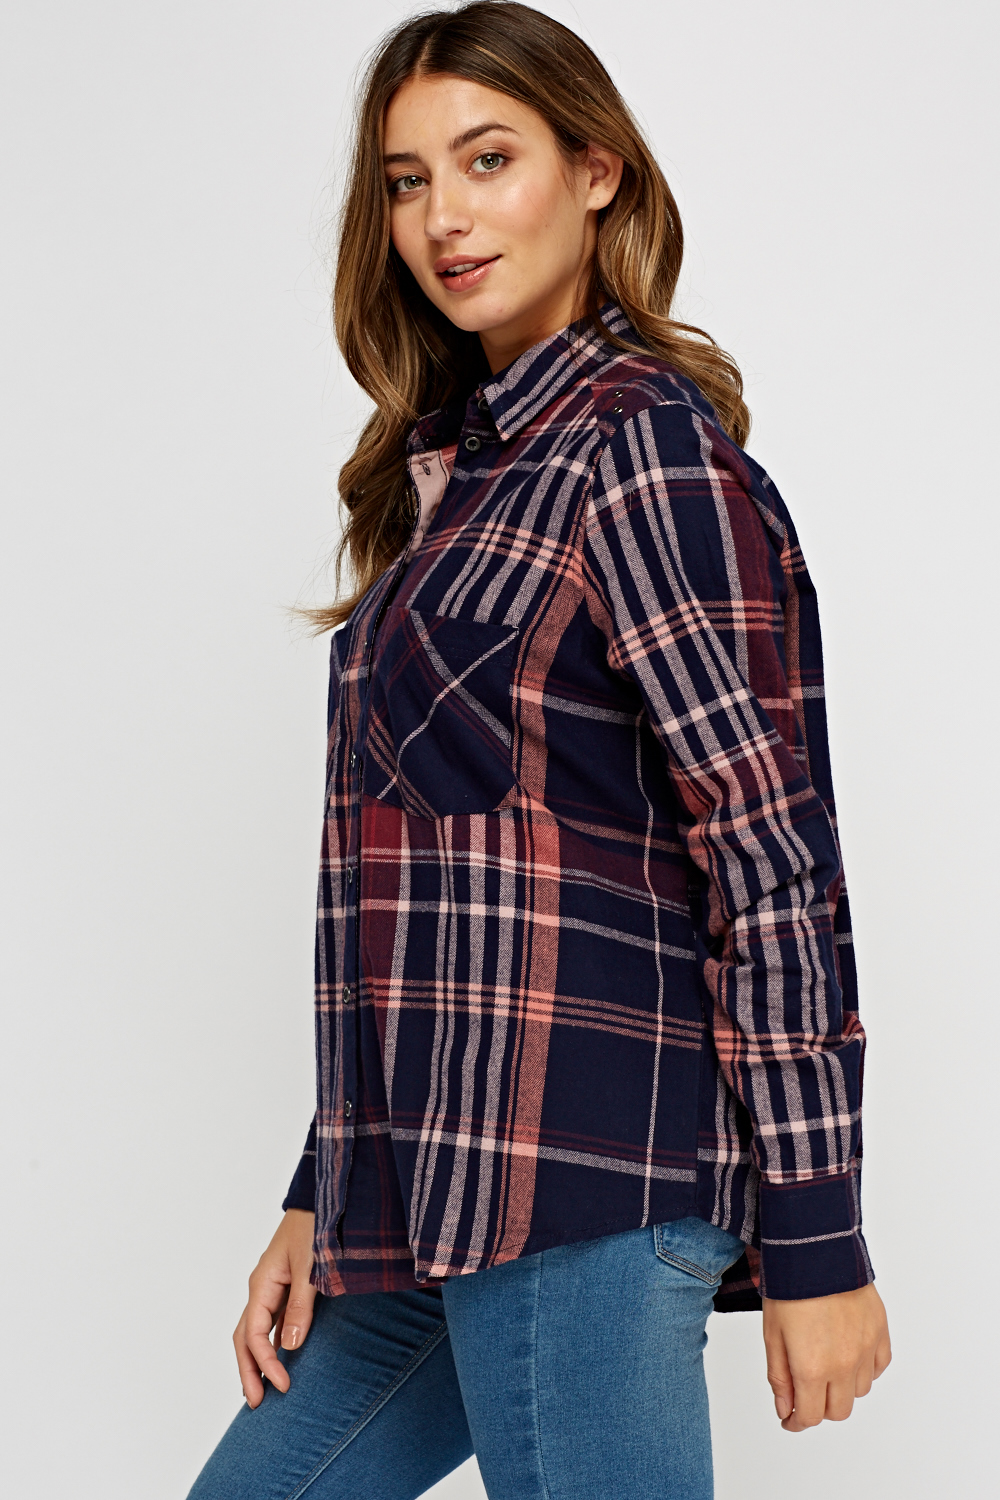 Cotton Checked Shirt - Just $4